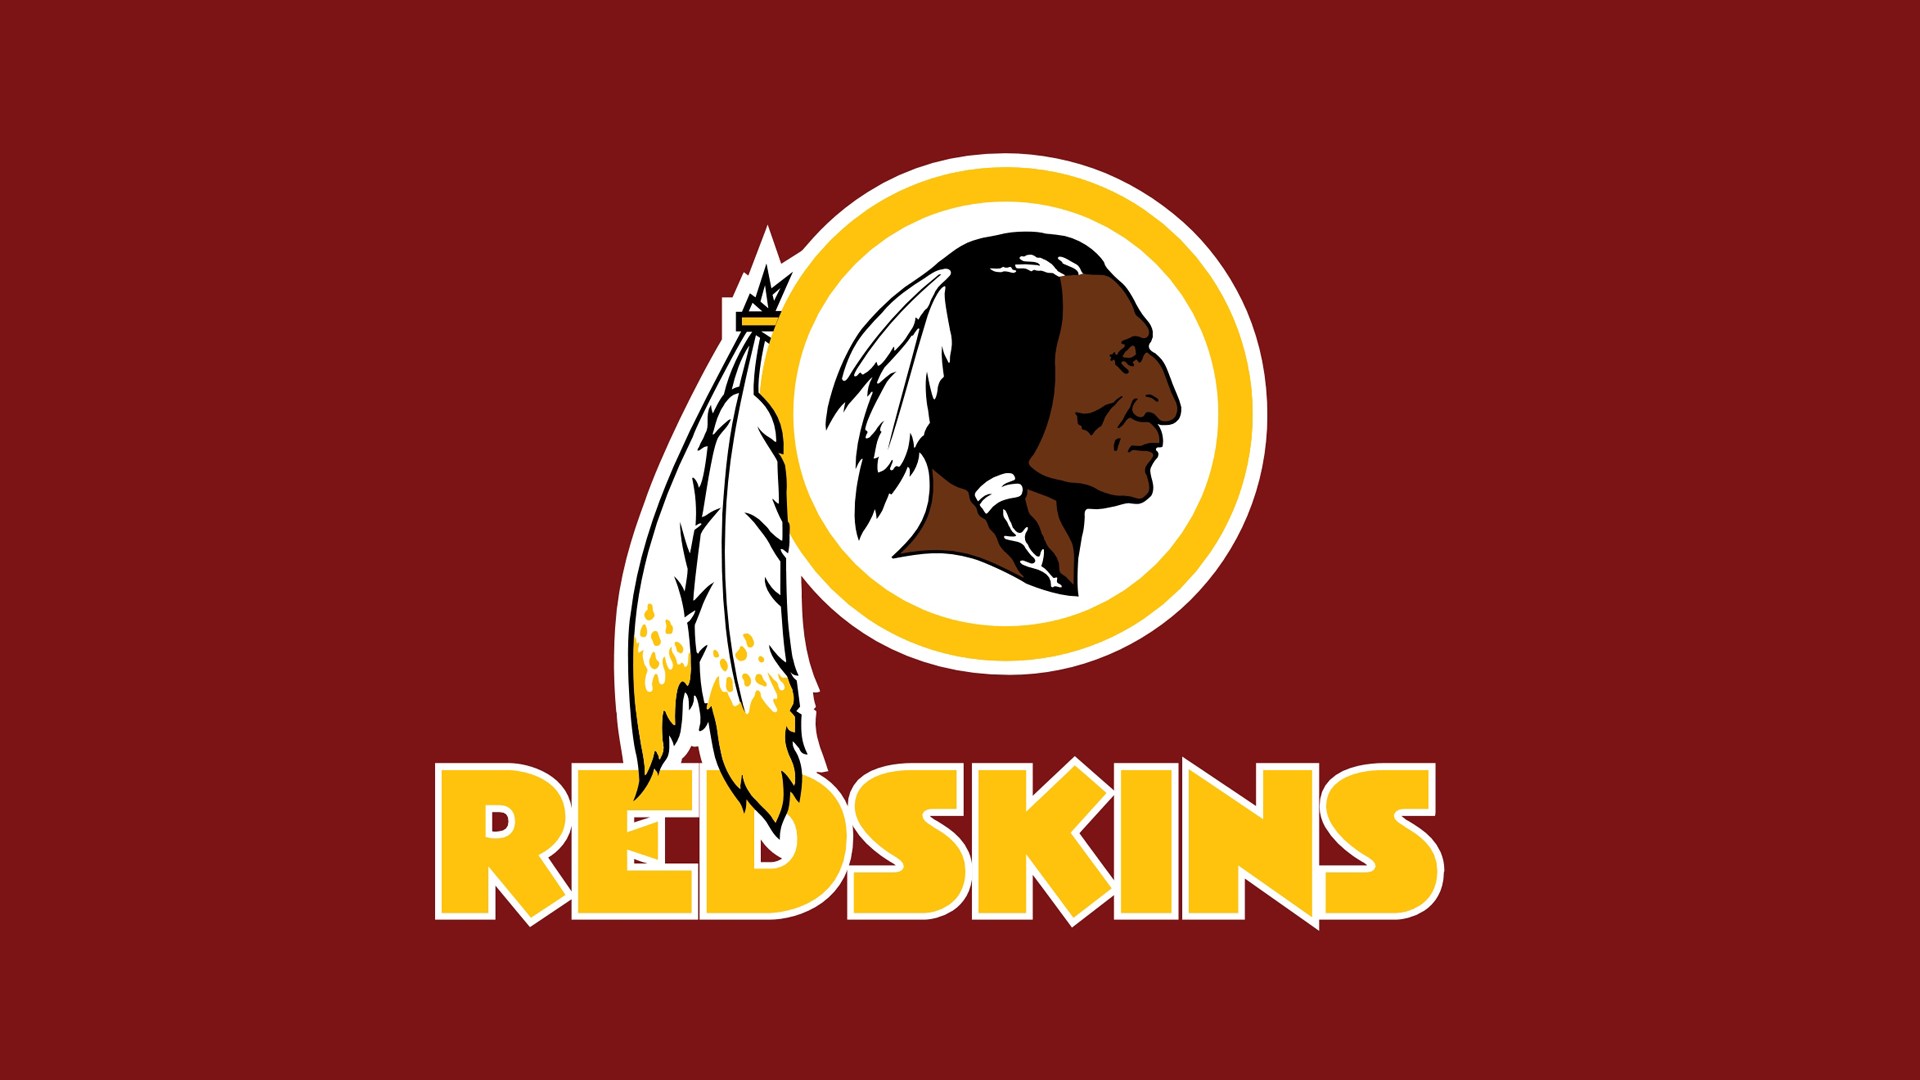 HD Washington Redskins Backgrounds with high-resolution 1920x1080 pixel. Download and set as wallpaper for Desktop Computer, Apple iPhone X, XS Max, XR, 8, 7, 6, SE, iPad, Android